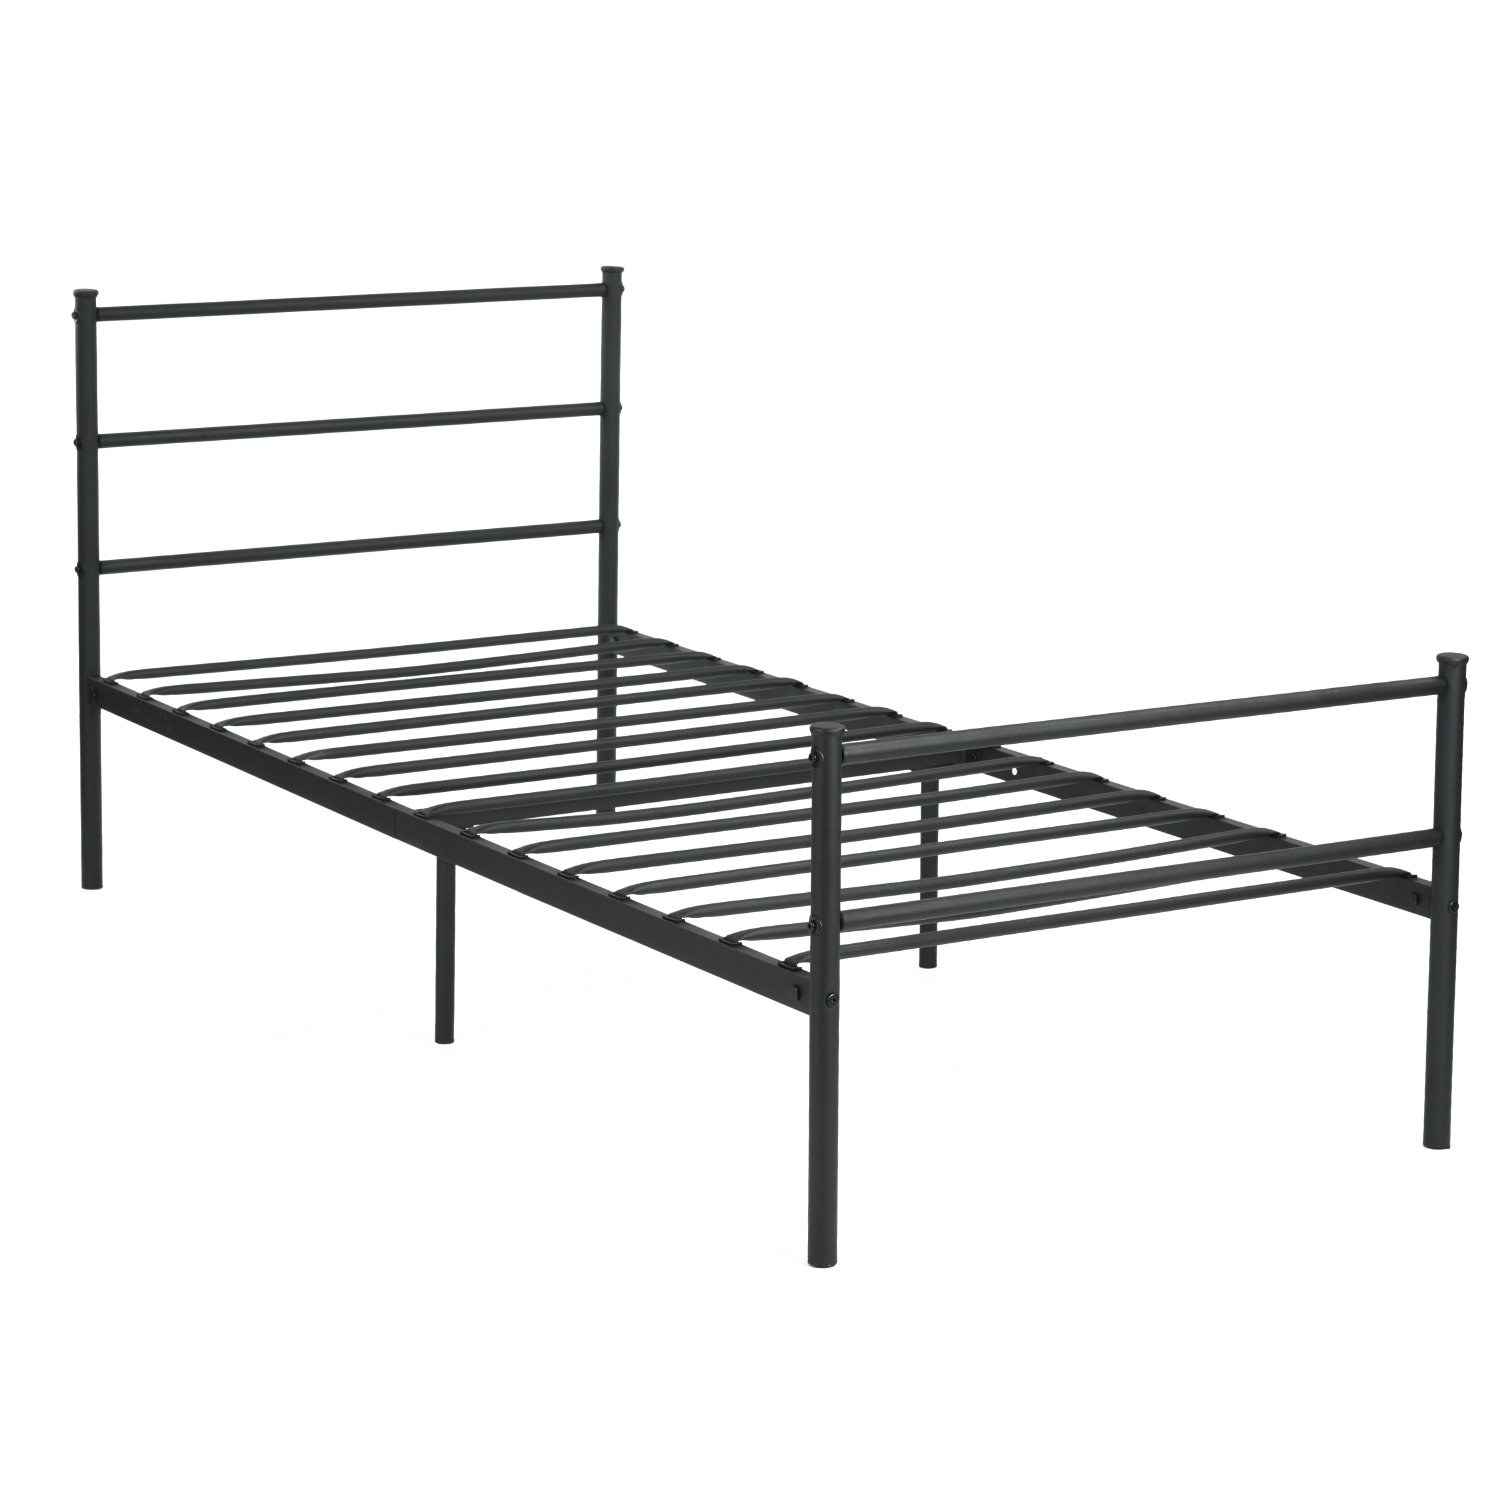 Book Cover GreenForest Metal Bed Frame Twin Size, Two Headboards 6 Legs Mattress Foundation Black Platform Bed Frame Box Spring Replacement for Boys Kids Adult Bedroom